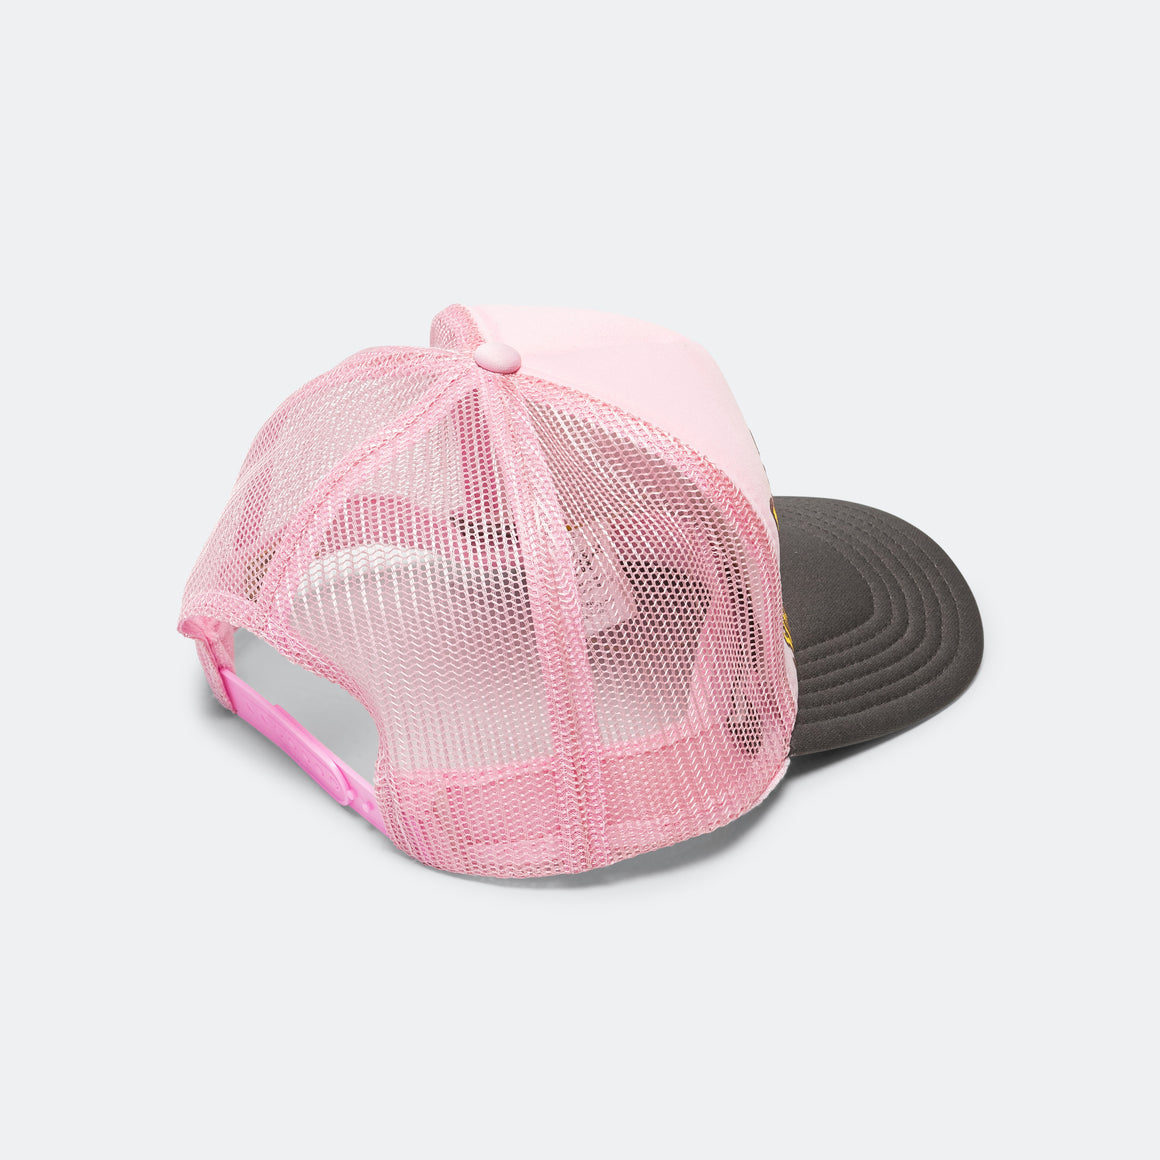 Kapital - CONEYCOWBOWY Trucker CAP - Pink x Charcoal - UP THERE